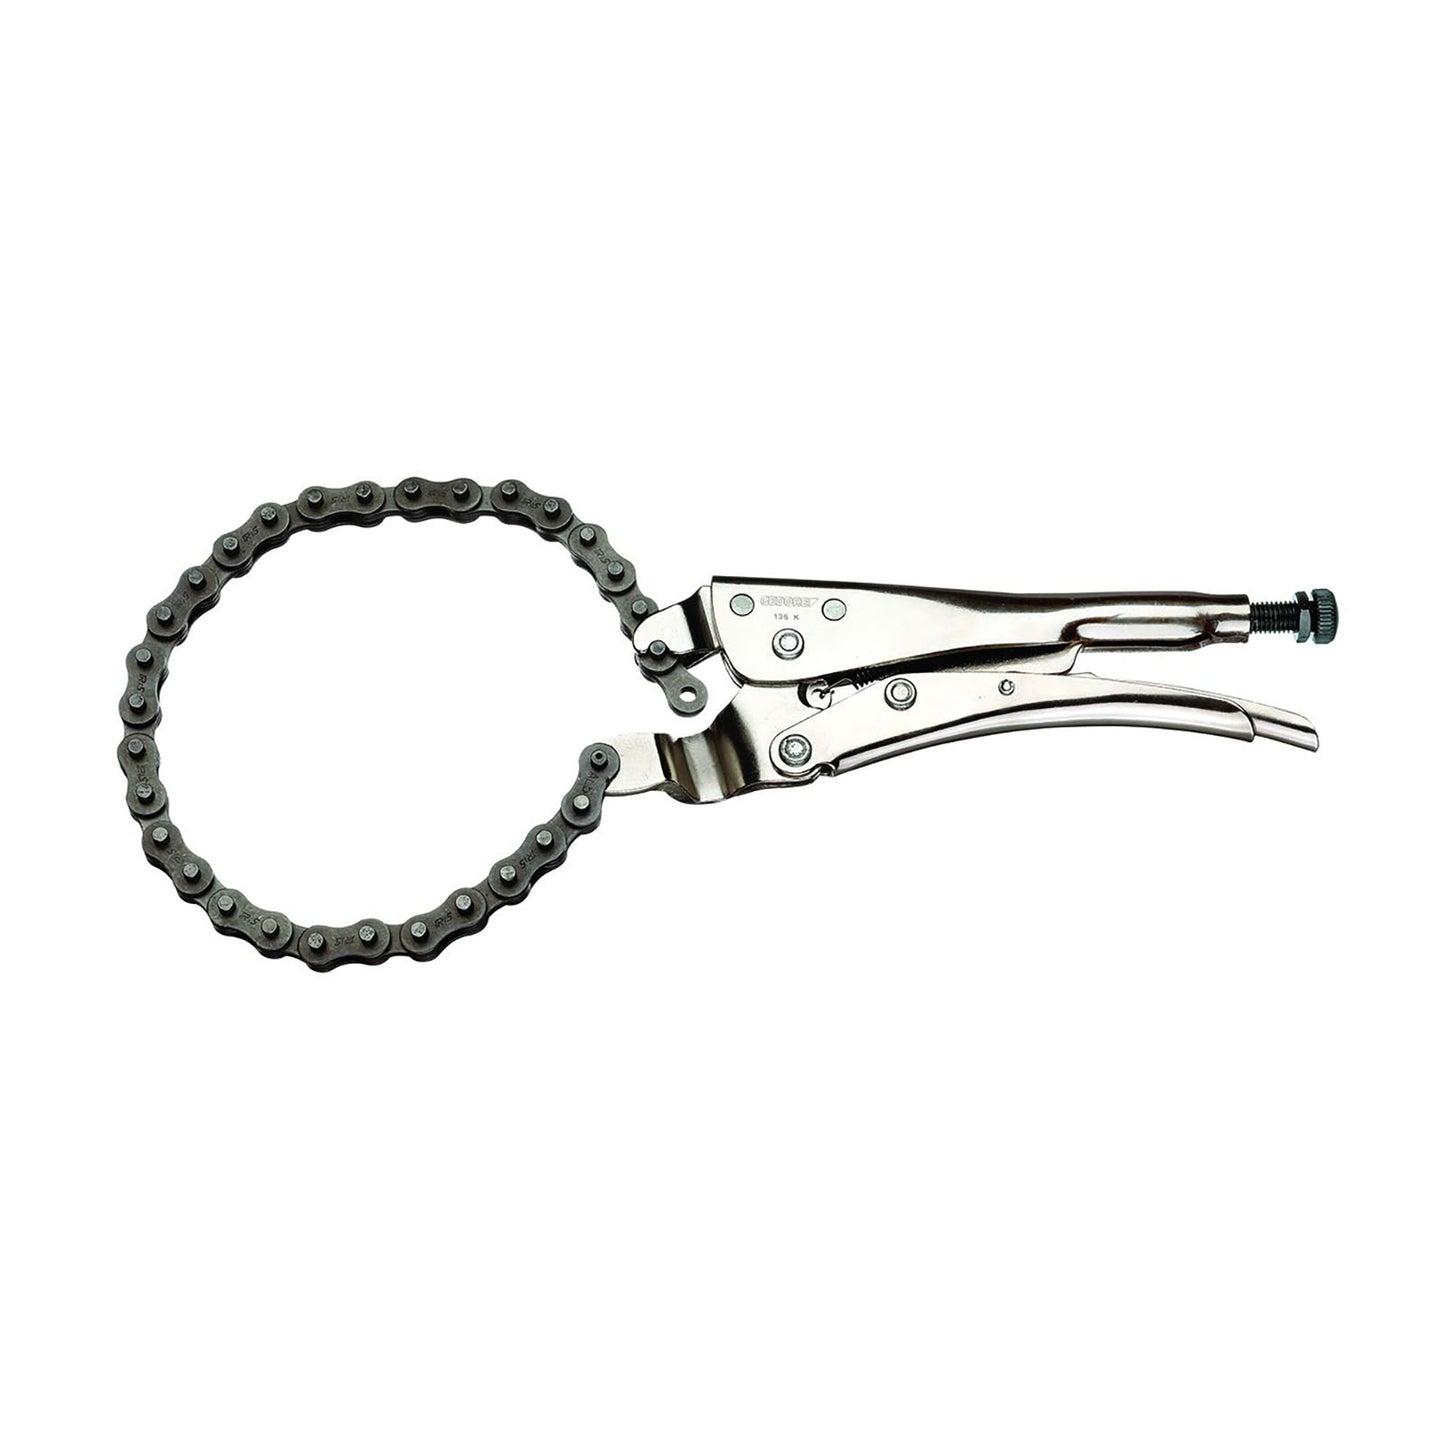 GEDORE 136 K-105 - Grip clamp with chain (2307227)